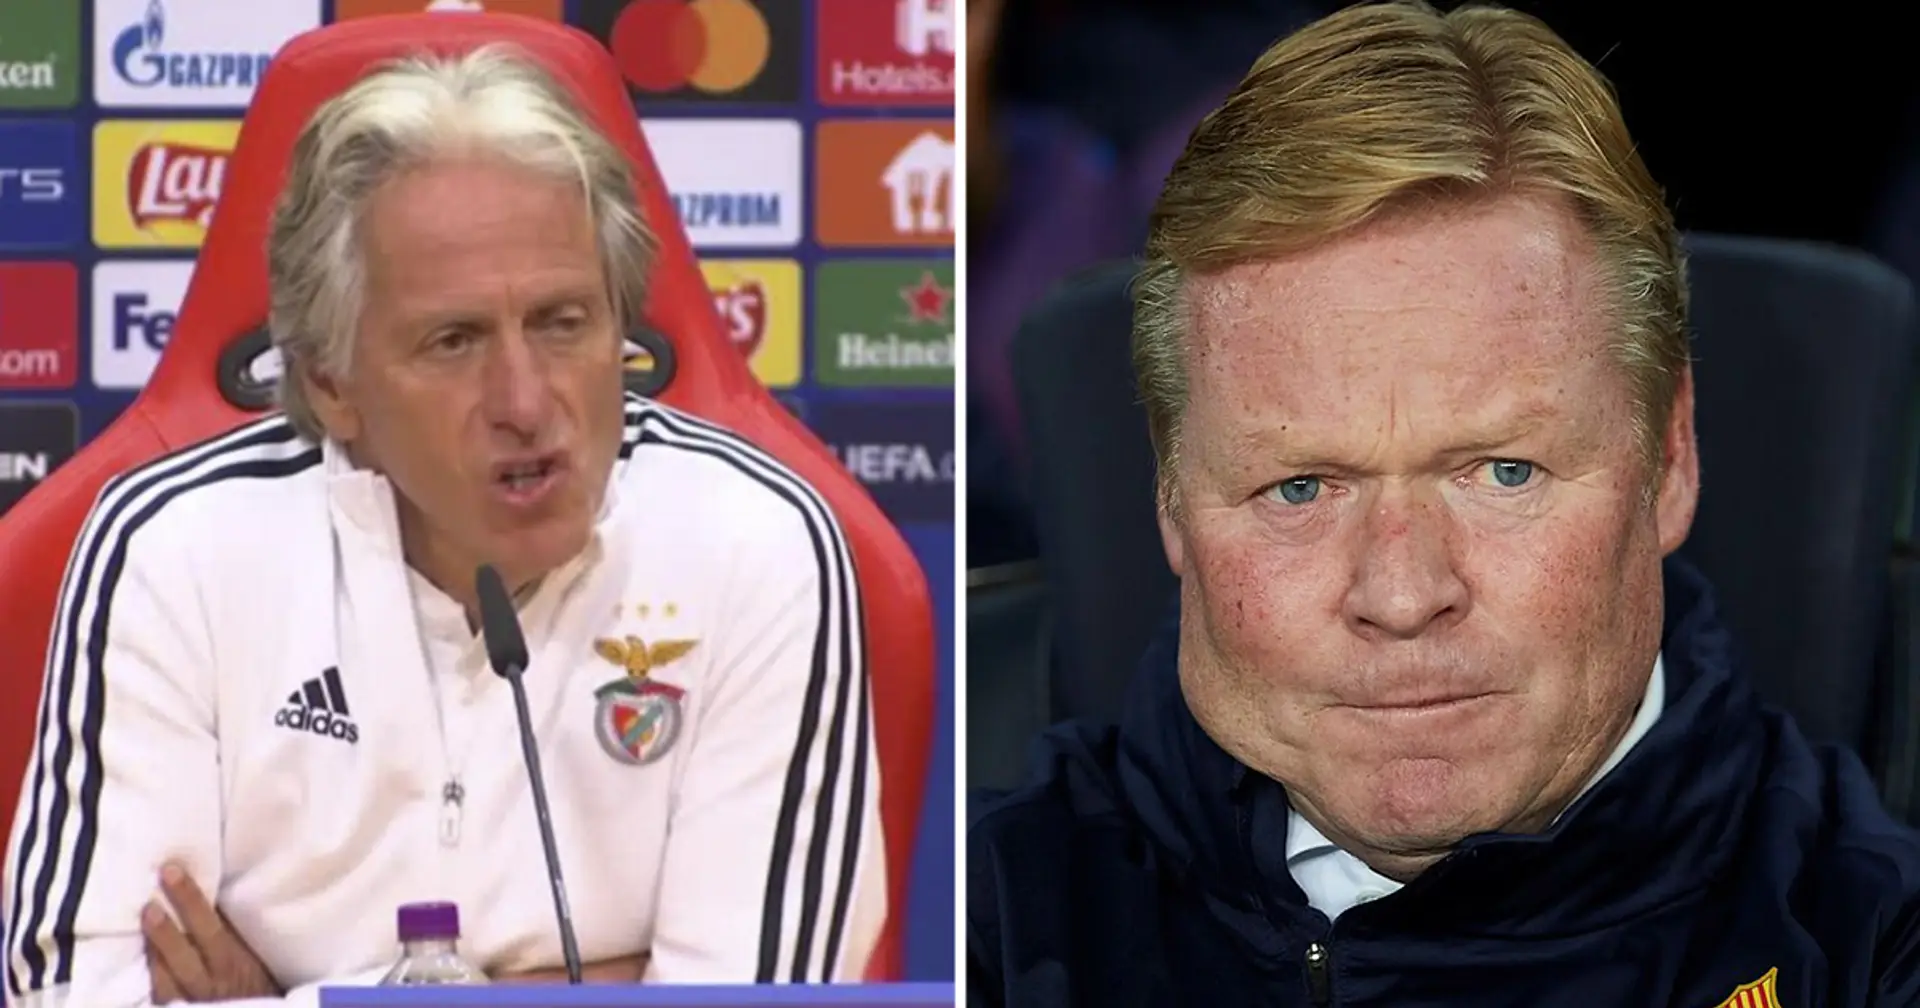 'Koeman has to worry and think about how to stop our players': Benfica boss Jorge Jesus